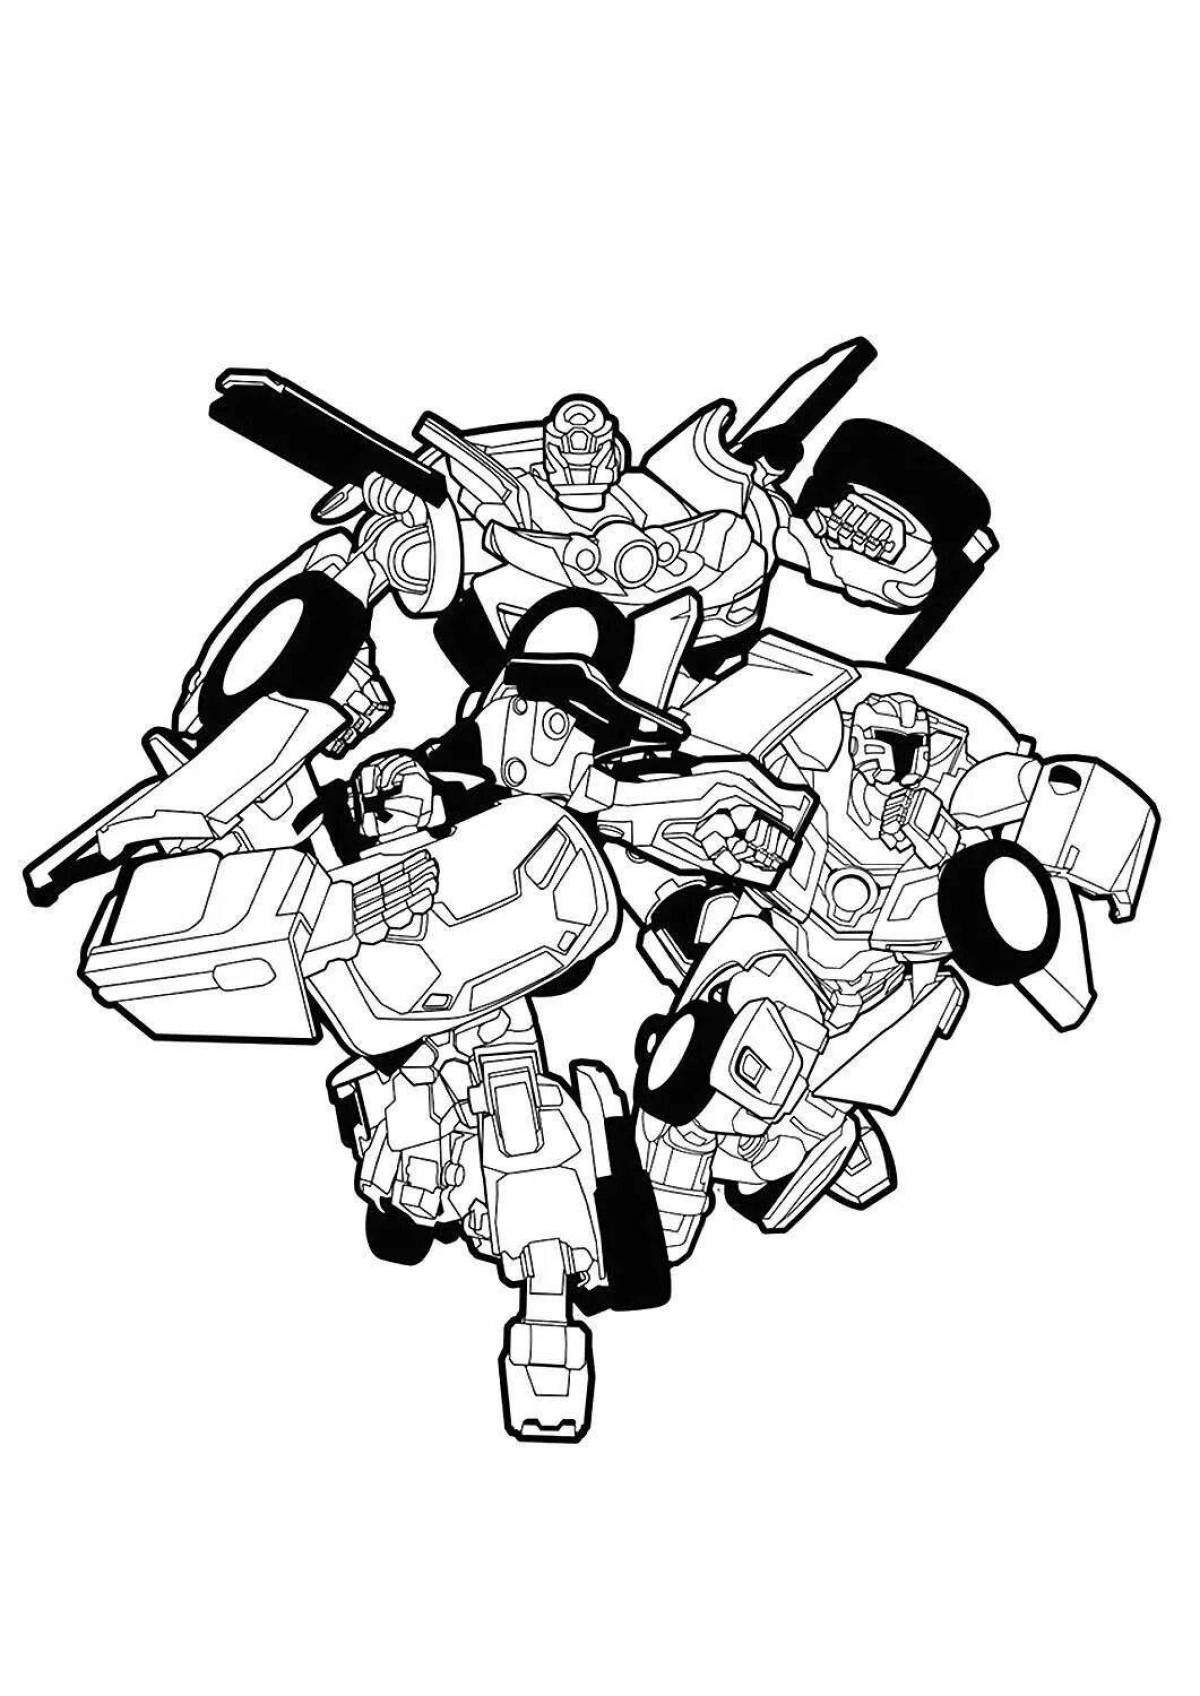 Playful tobot coloring page